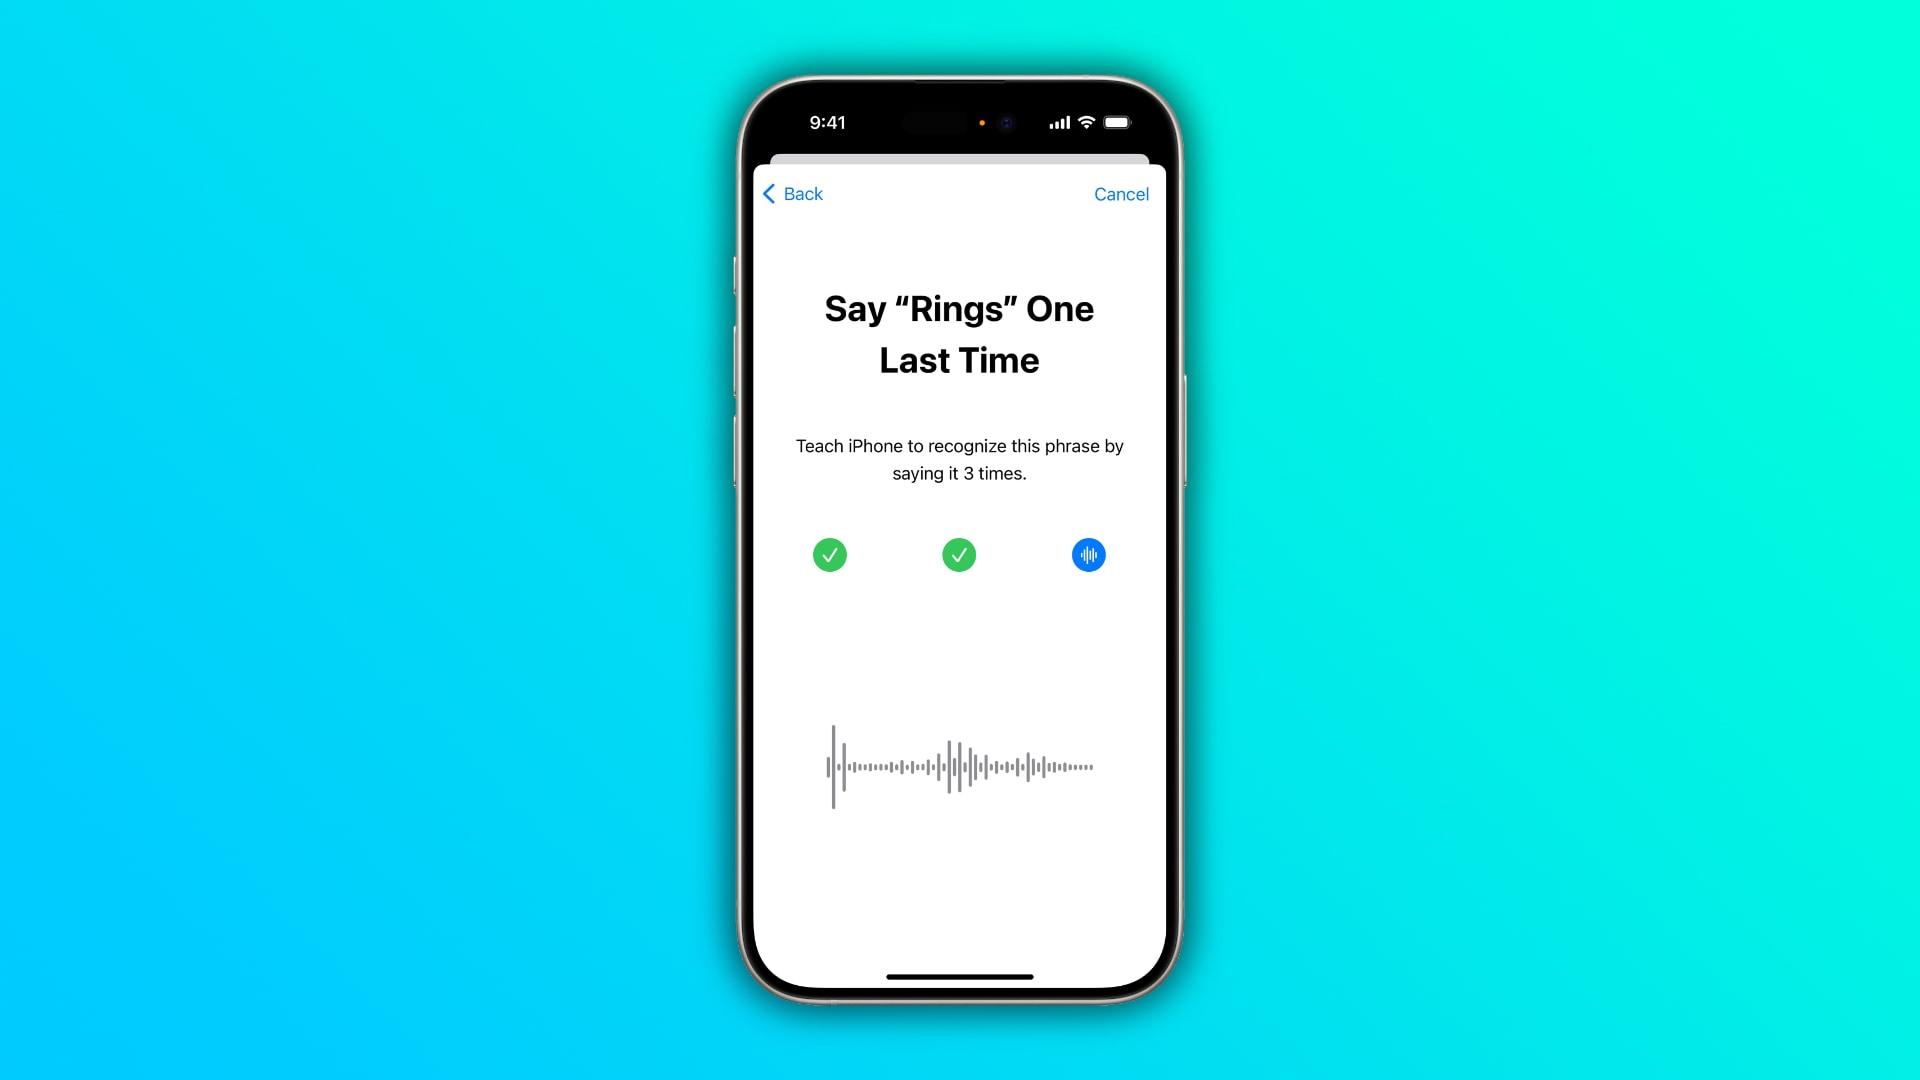 Recording a custom phrase for Vocal Shortcuts on iPhone, set against a light blue and green colorful gradient background